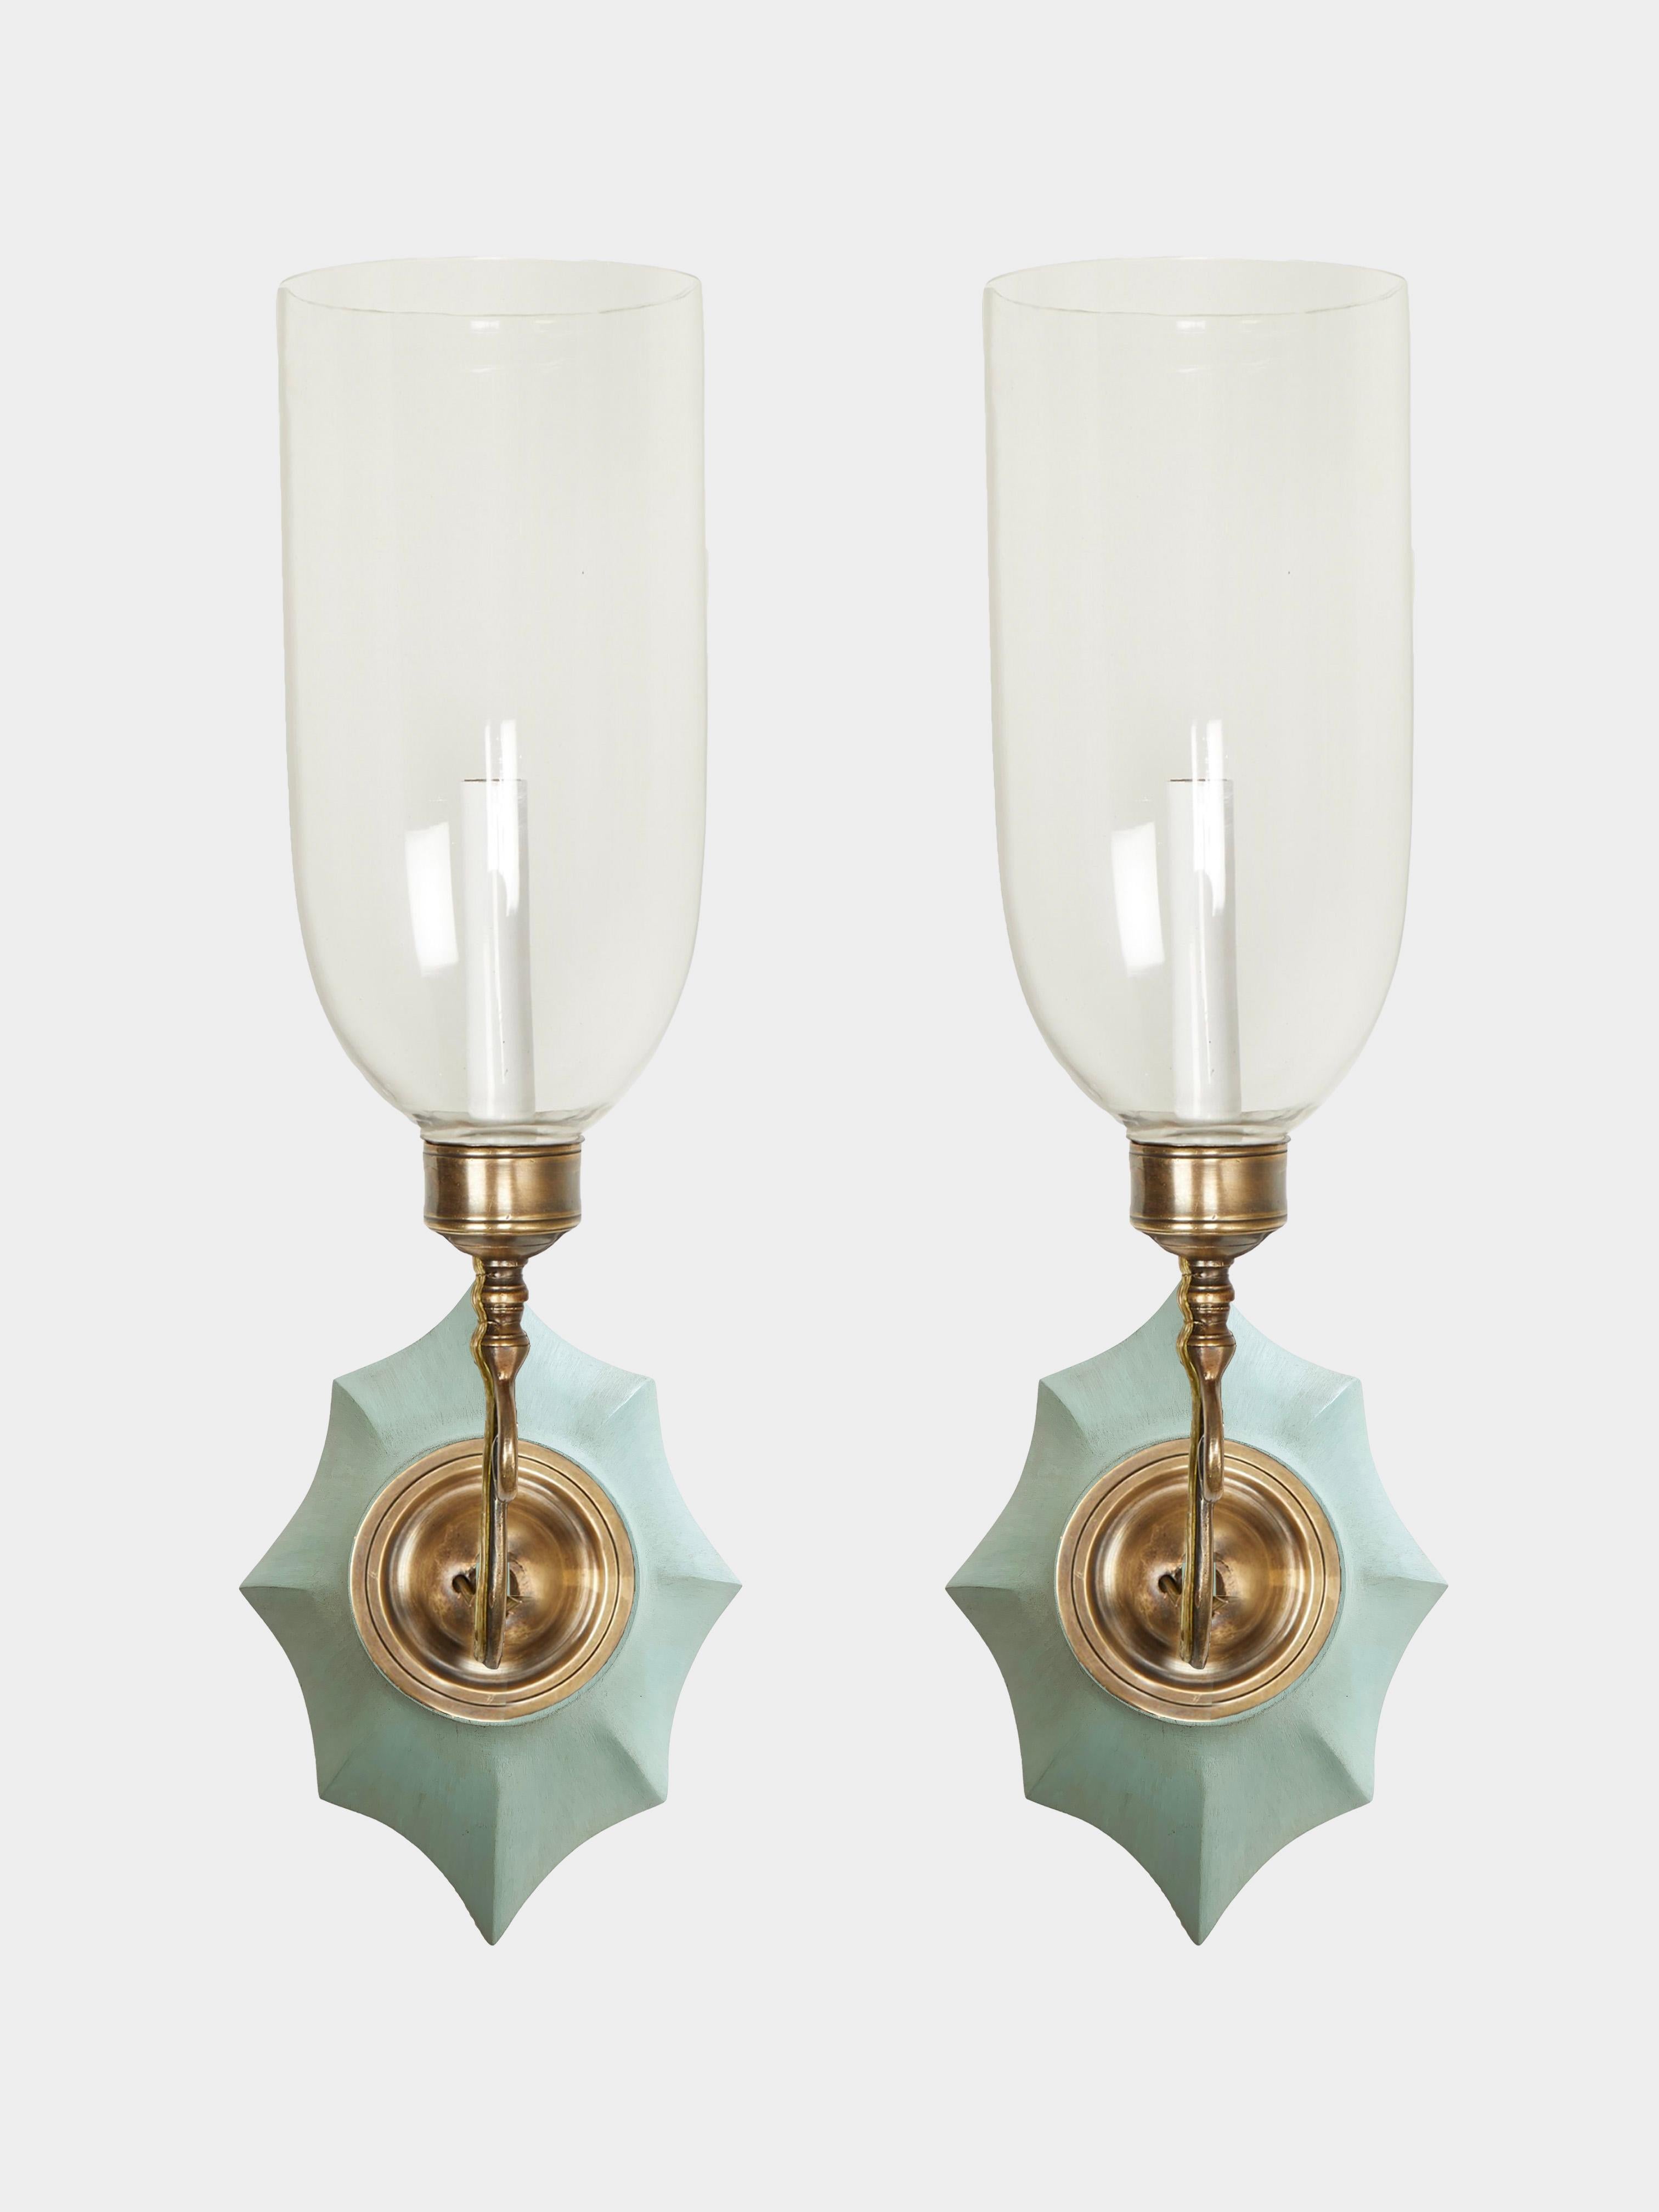 A pair of hand-carved mahogany Boissy backplates with patinated brass sconce fittings and clear glass hurricane shades. Electrified with one candelabra base socket per sconce.

Our custom hurricane sconces are available with wood, painted or gilt